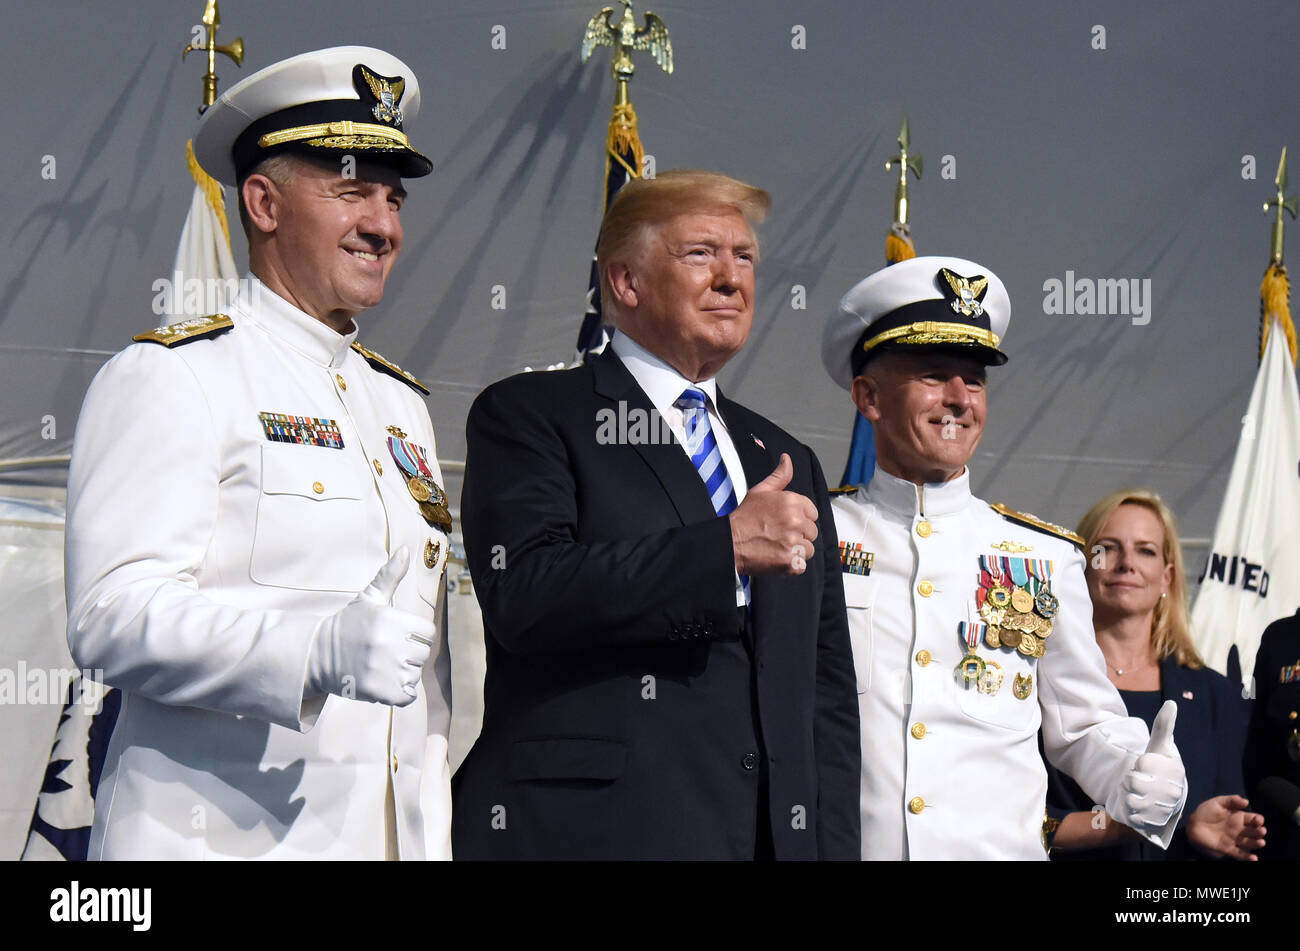 Washington, District of Columbia, USA. 1st June, 2018. President DONALD TRUMP participates in the U.S. Coast Guard Change-of-Command Ceremony as Adm. PAUL F. ZUKUNFT (R) is relieved by Adm. KARL L. SCHULTZ (L) as commandant. Credit: Olivier Douliery/CNP/ZUMA Wire/Alamy Live News Stock Photo